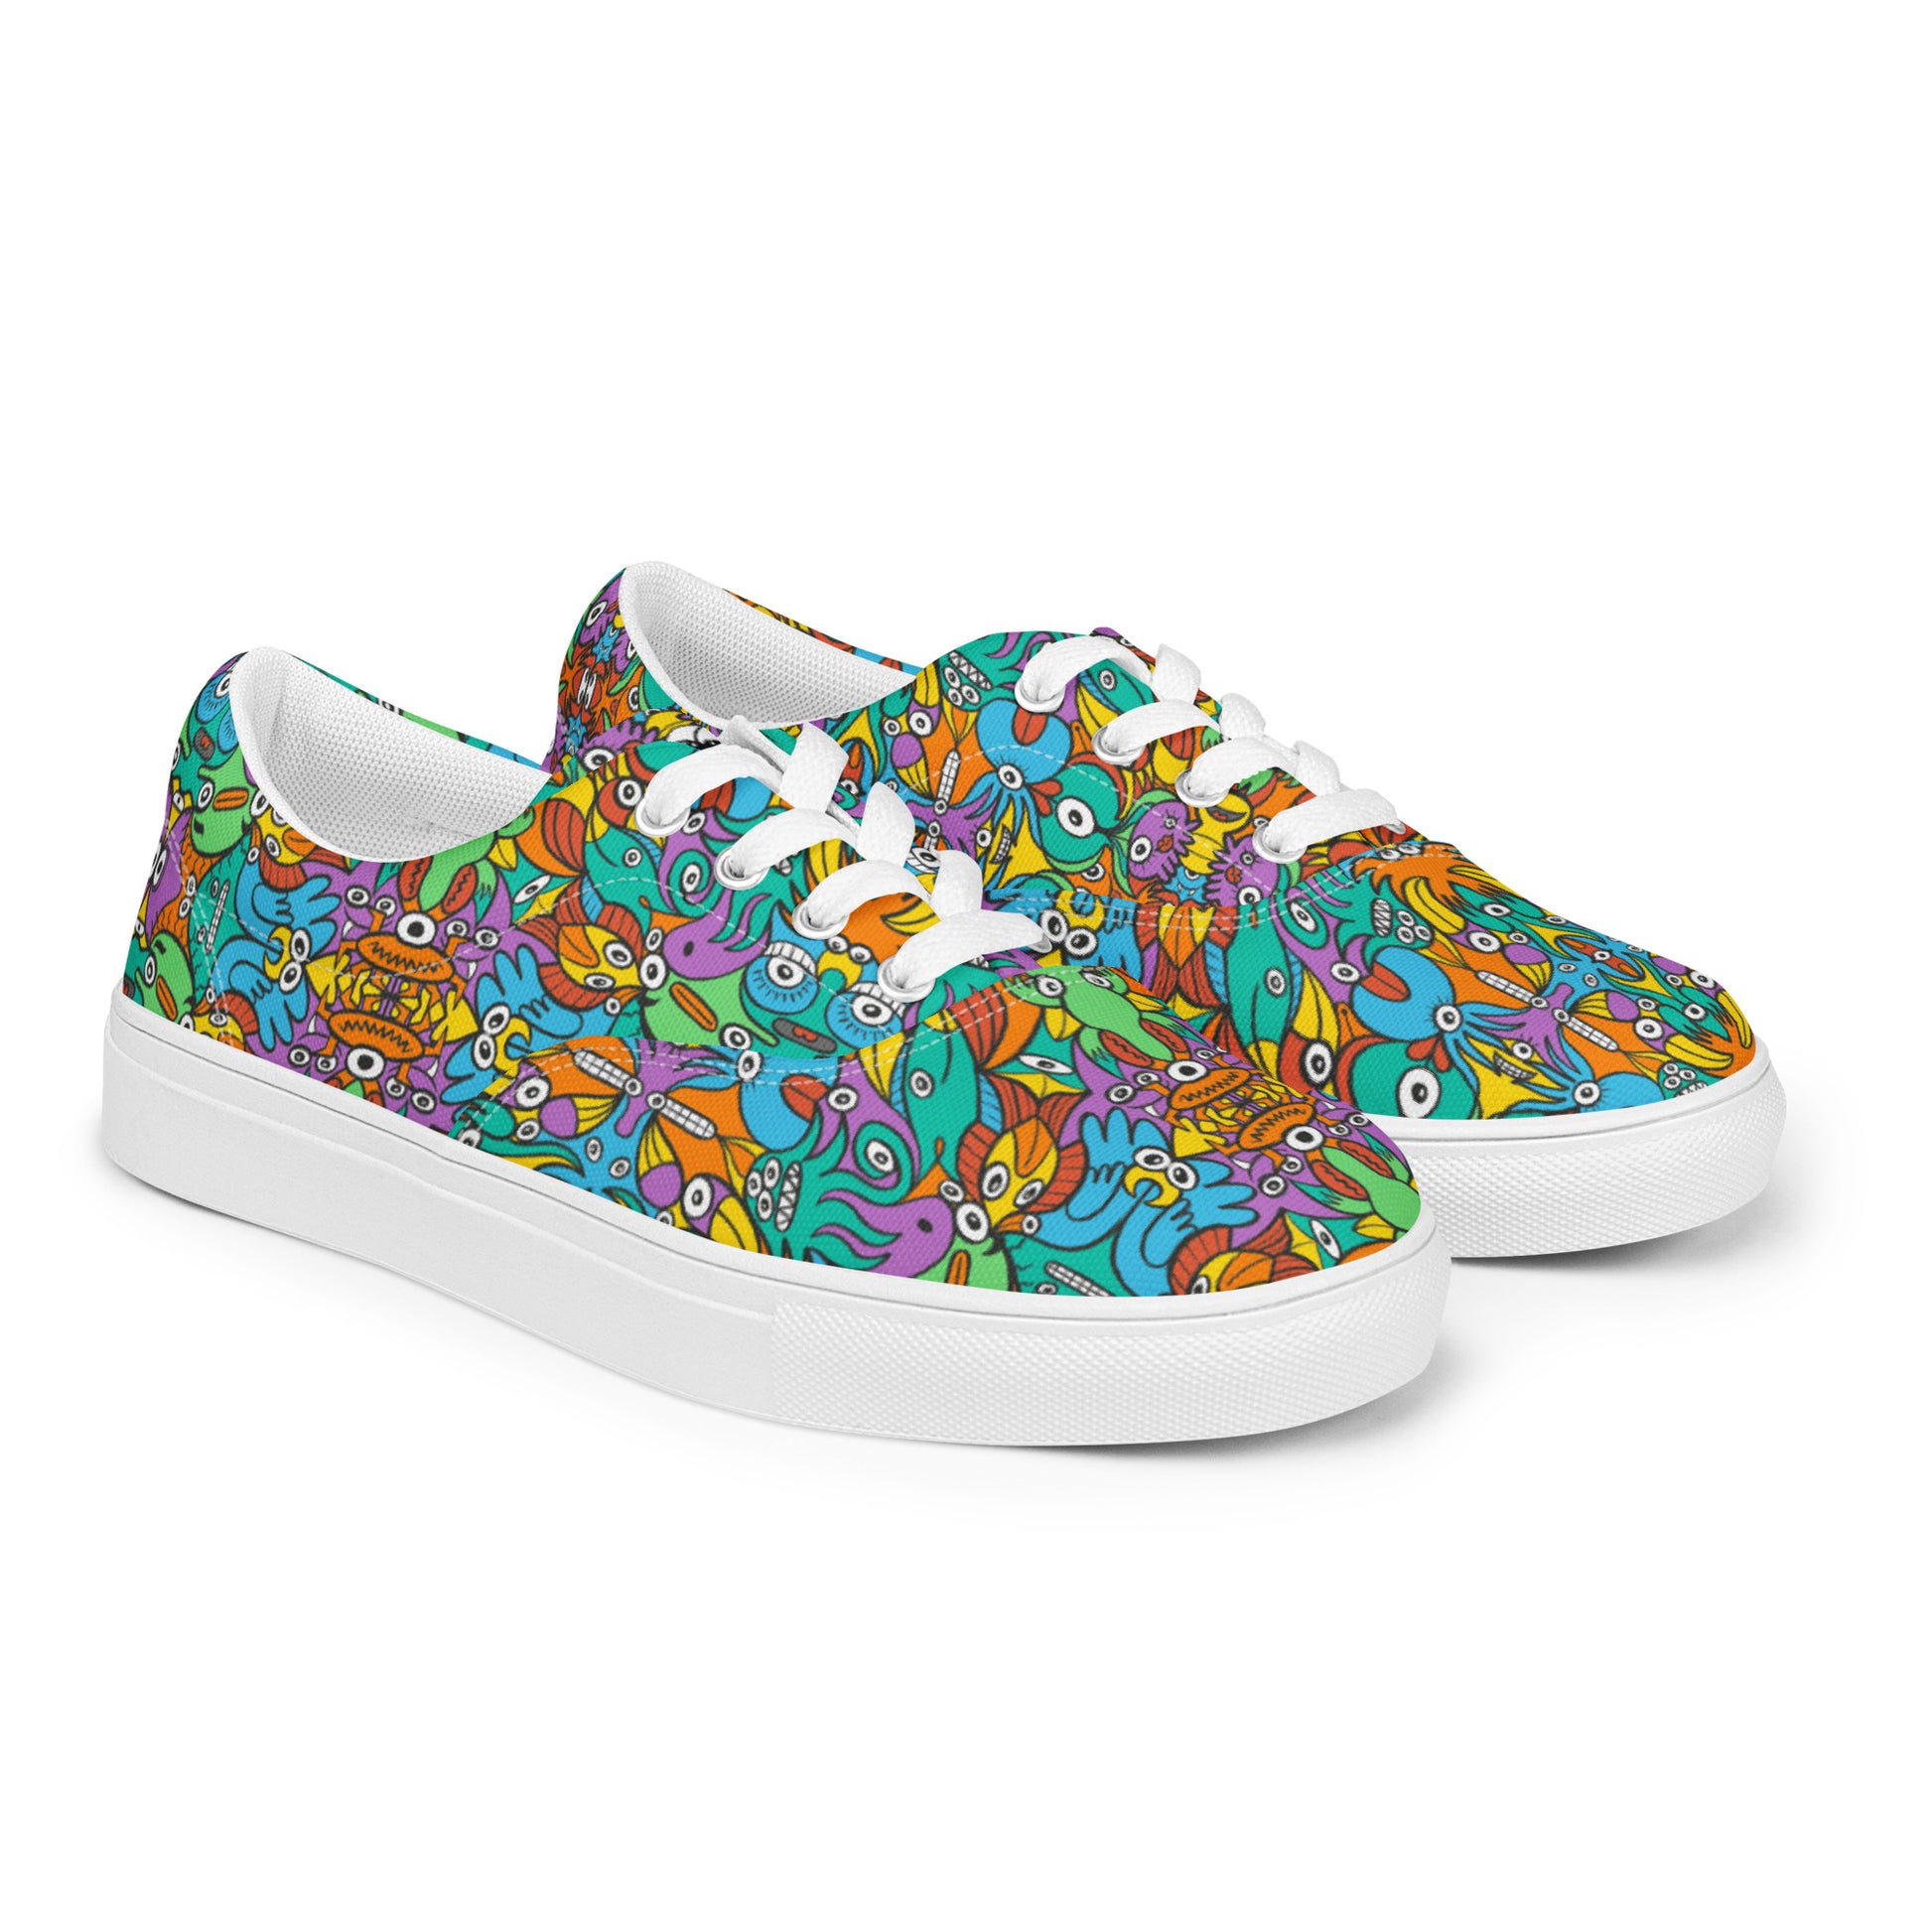 Fantastic doodle world full of weird creatures Women’s lace-up canvas shoes. Overview